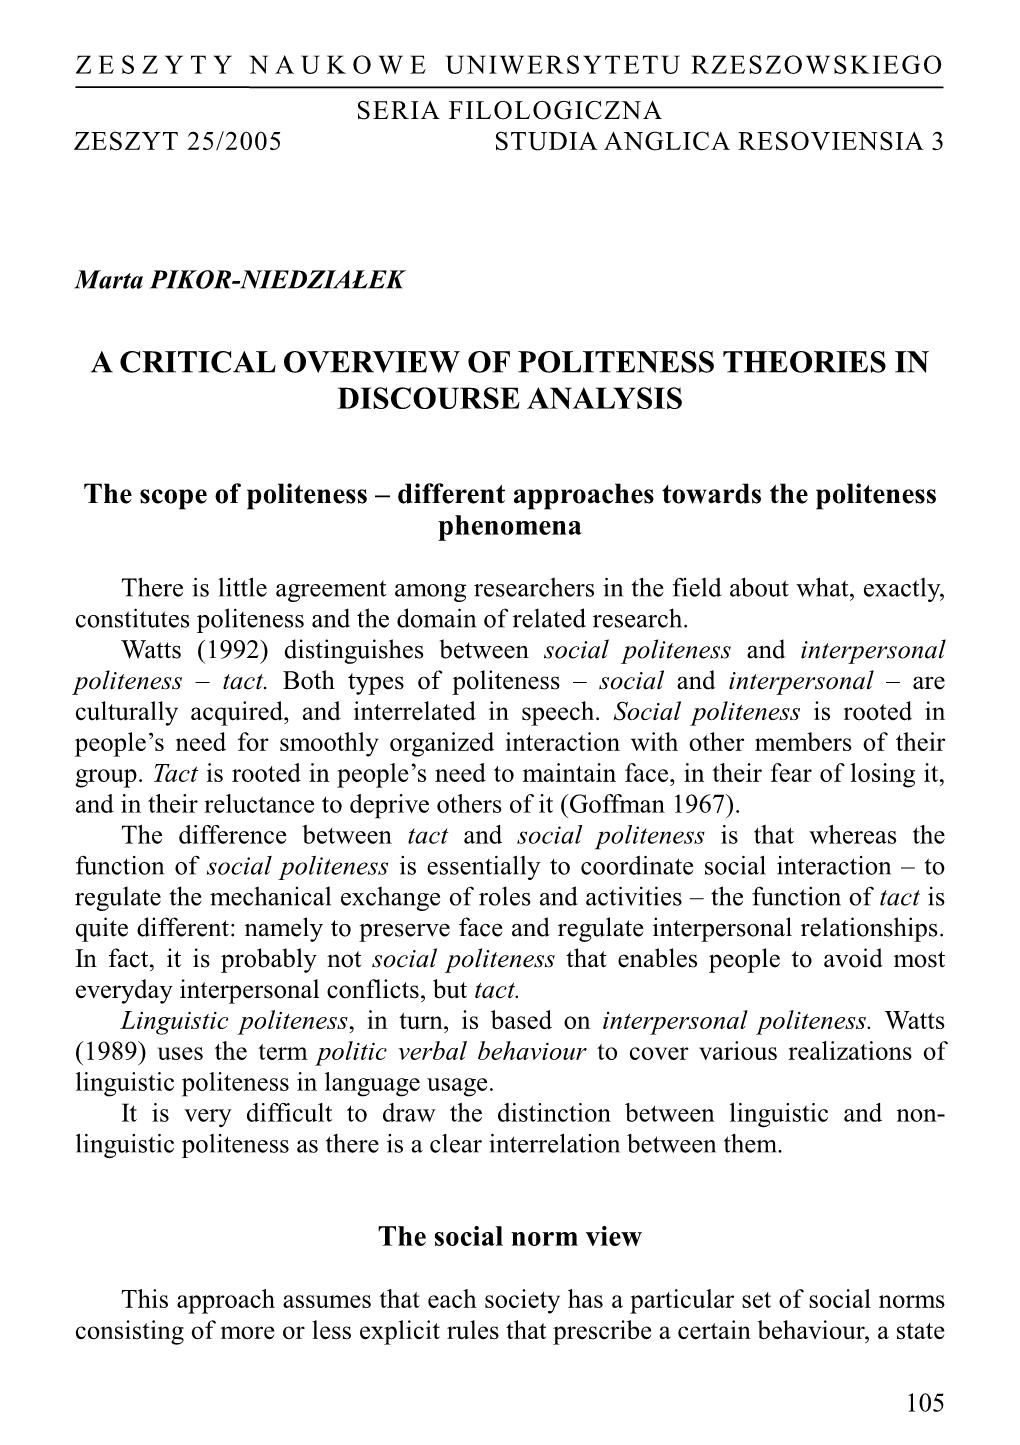 A Critical Overview of Politeness Theories in Discourse Analysis